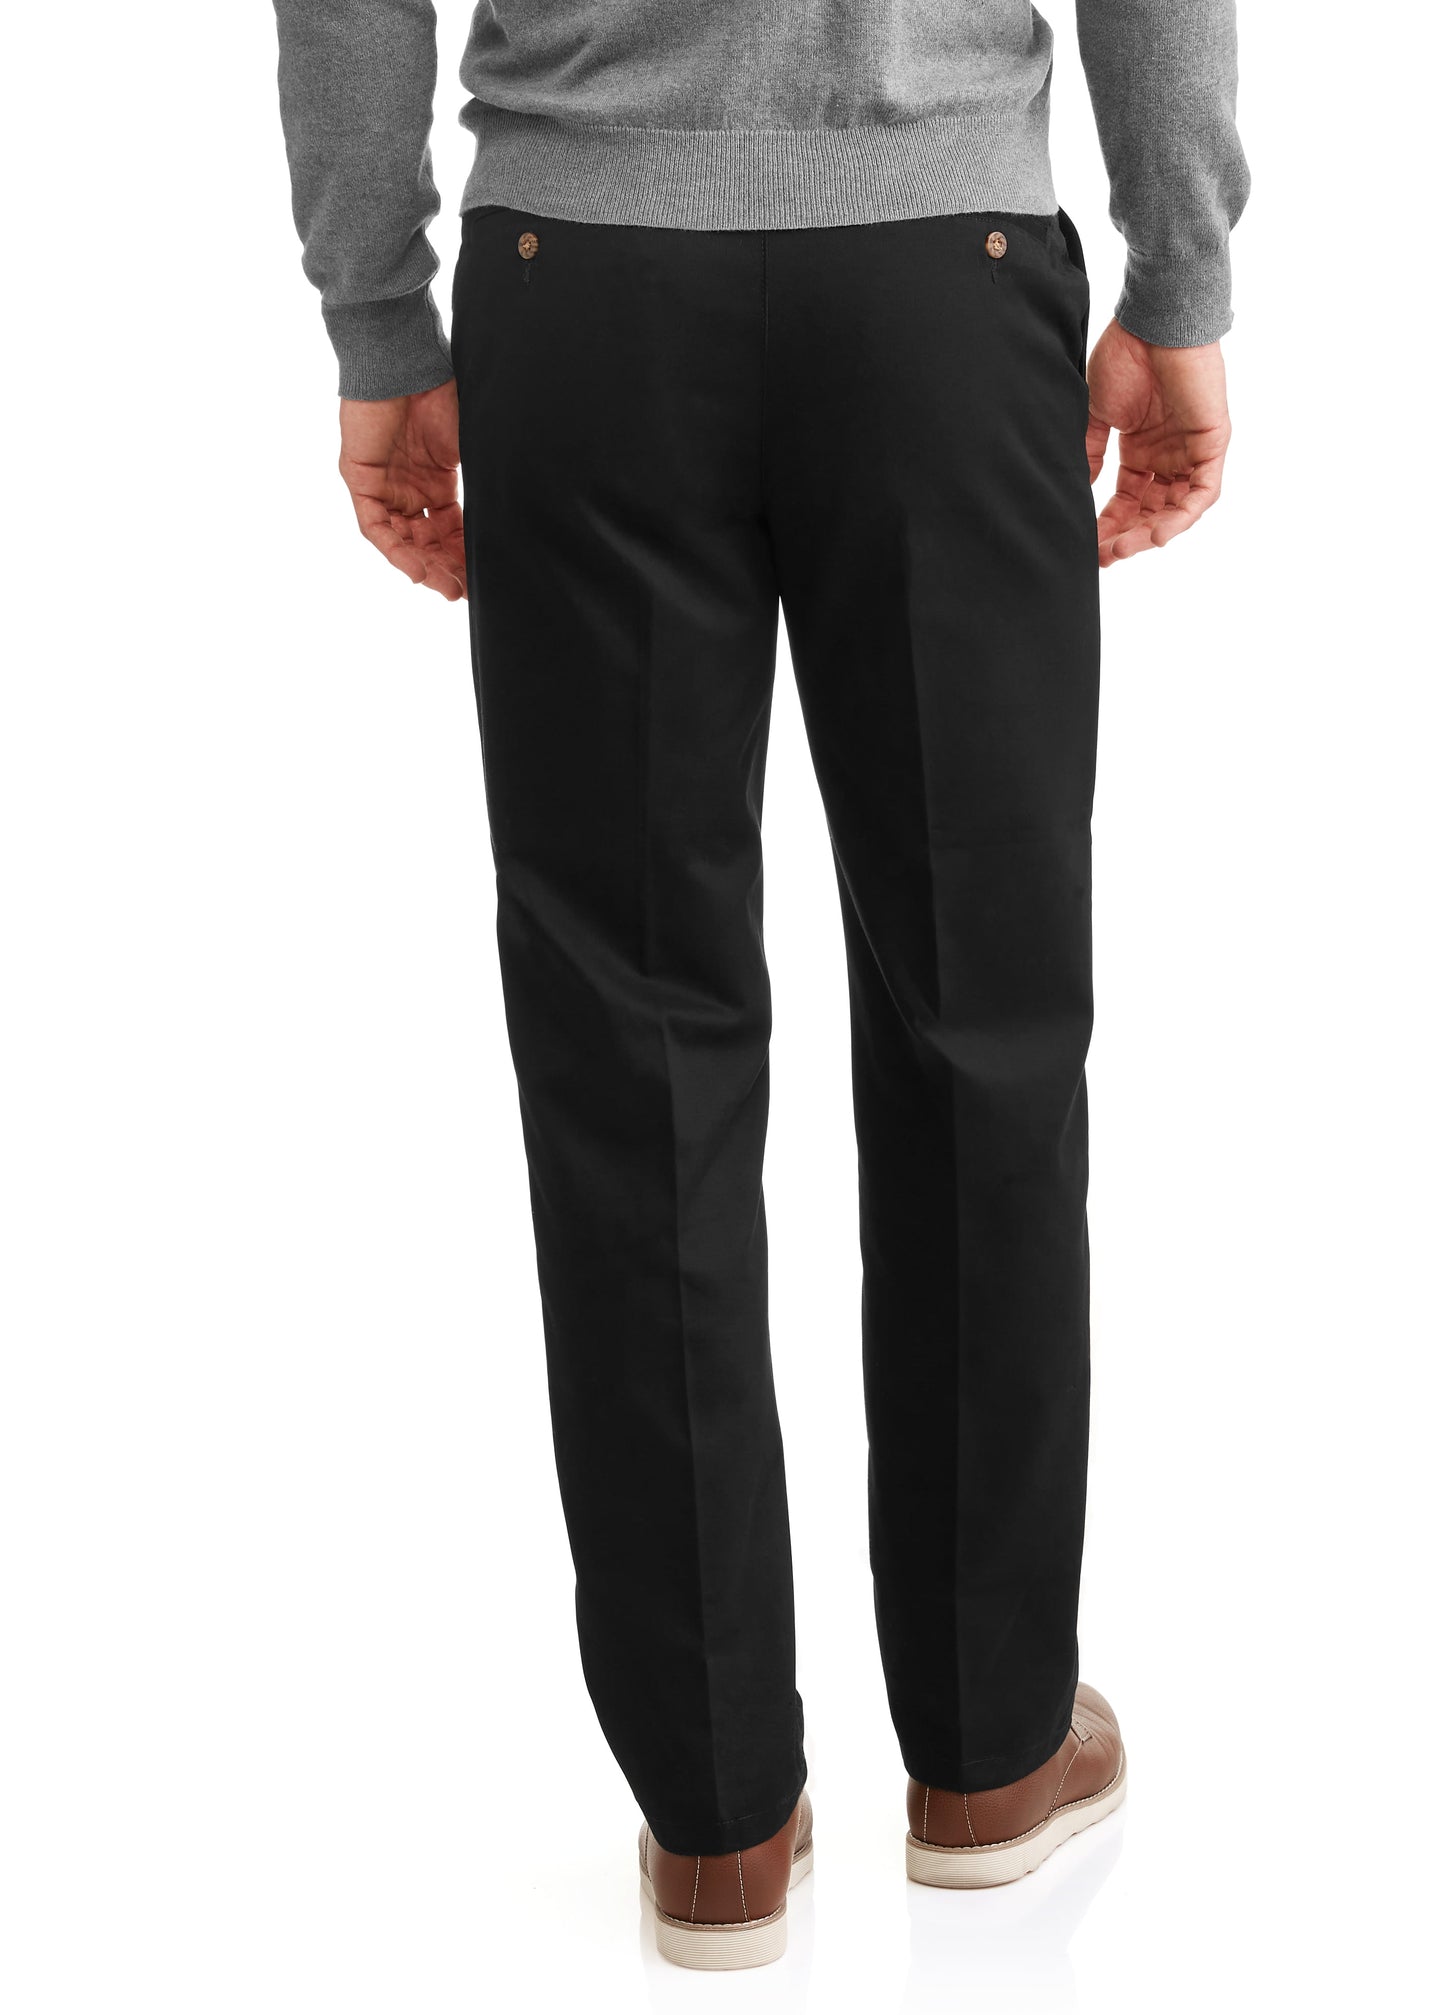 George Mens and Big Mens Wrinkle Resistant Flat Front 100% Cotton Twill Pant with Soil Release